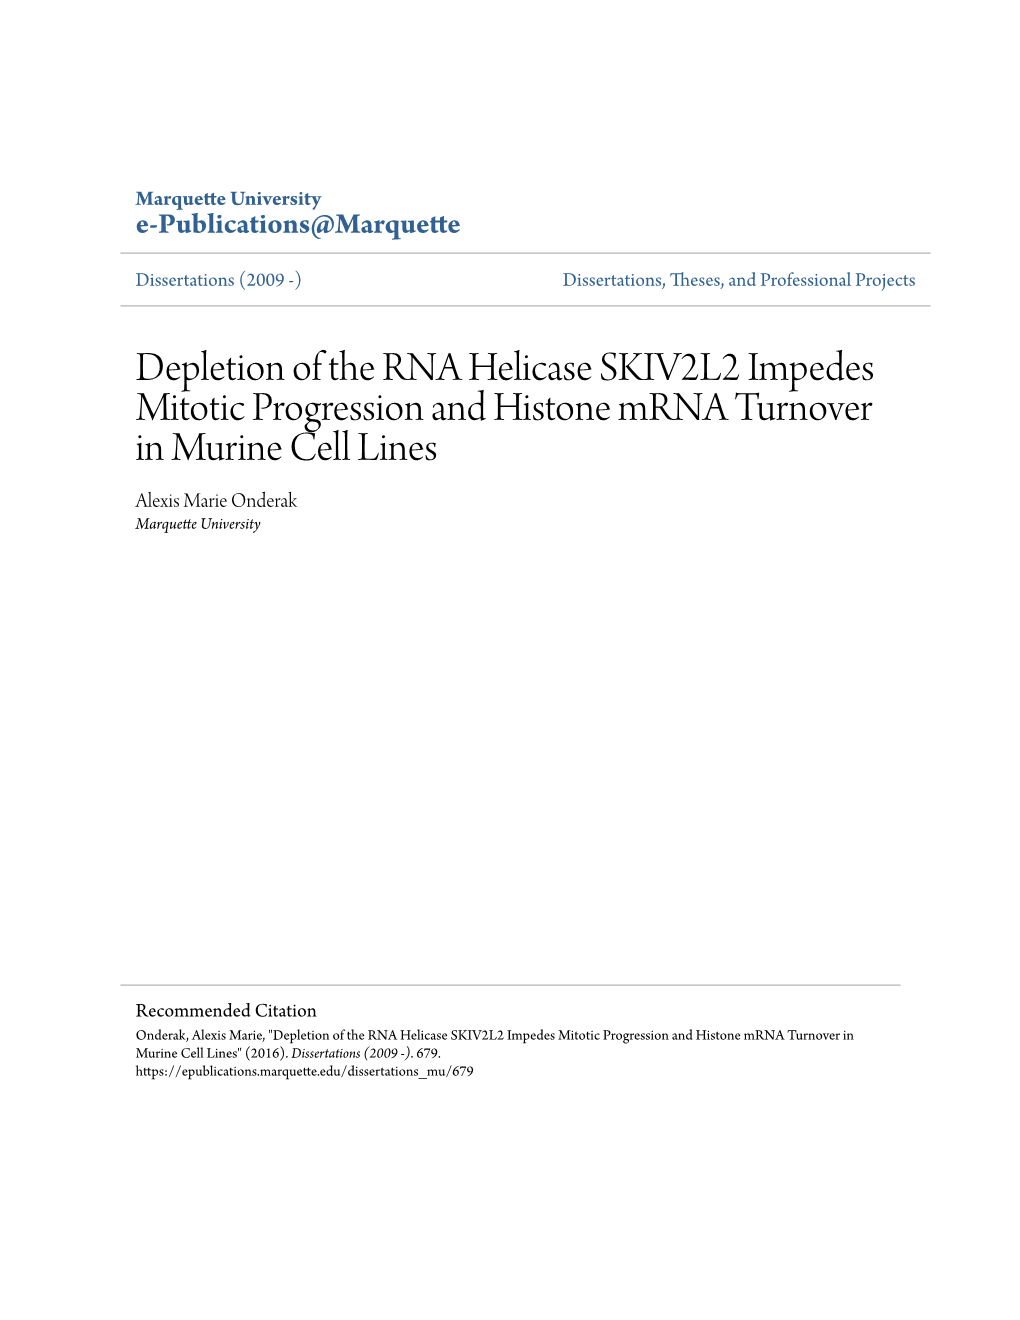 Depletion of the RNA Helicase SKIV2L2 Impedes Mitotic Progression and Histone Mrna Turnover in Murine Cell Lines Alexis Marie Onderak Marquette University